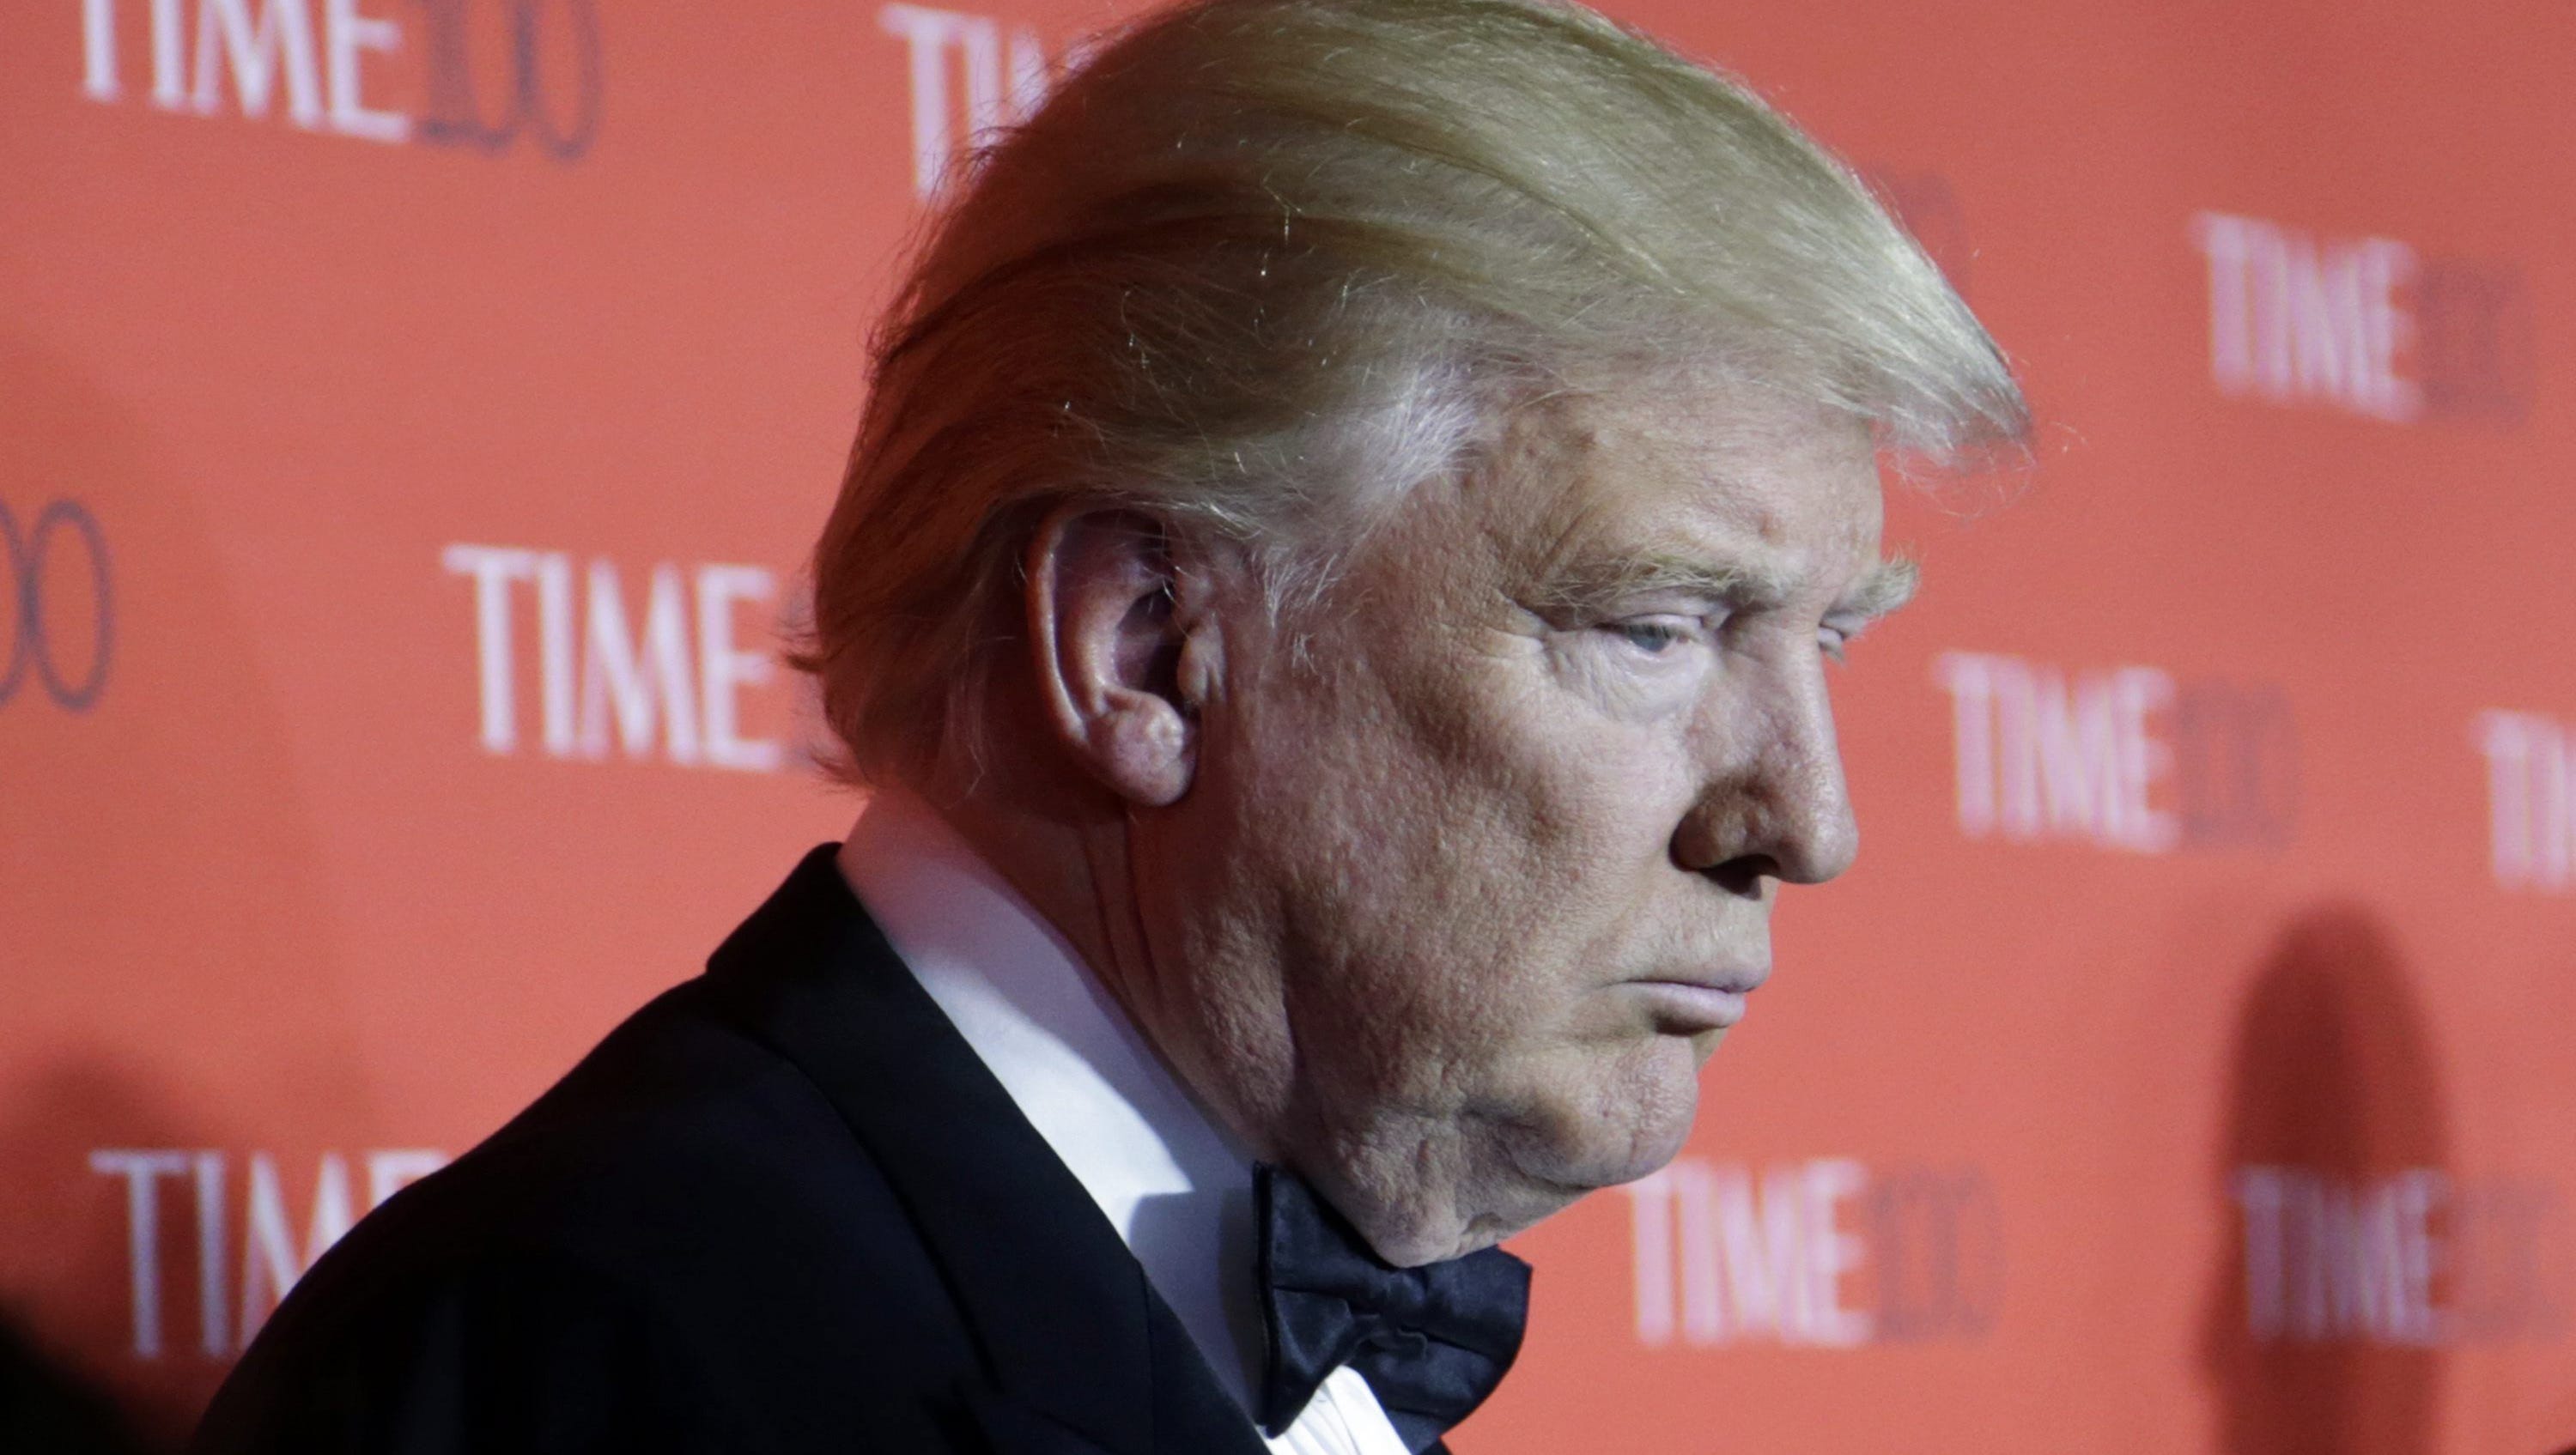 Time Asks Trump To Take Down Fake Magazine Covers